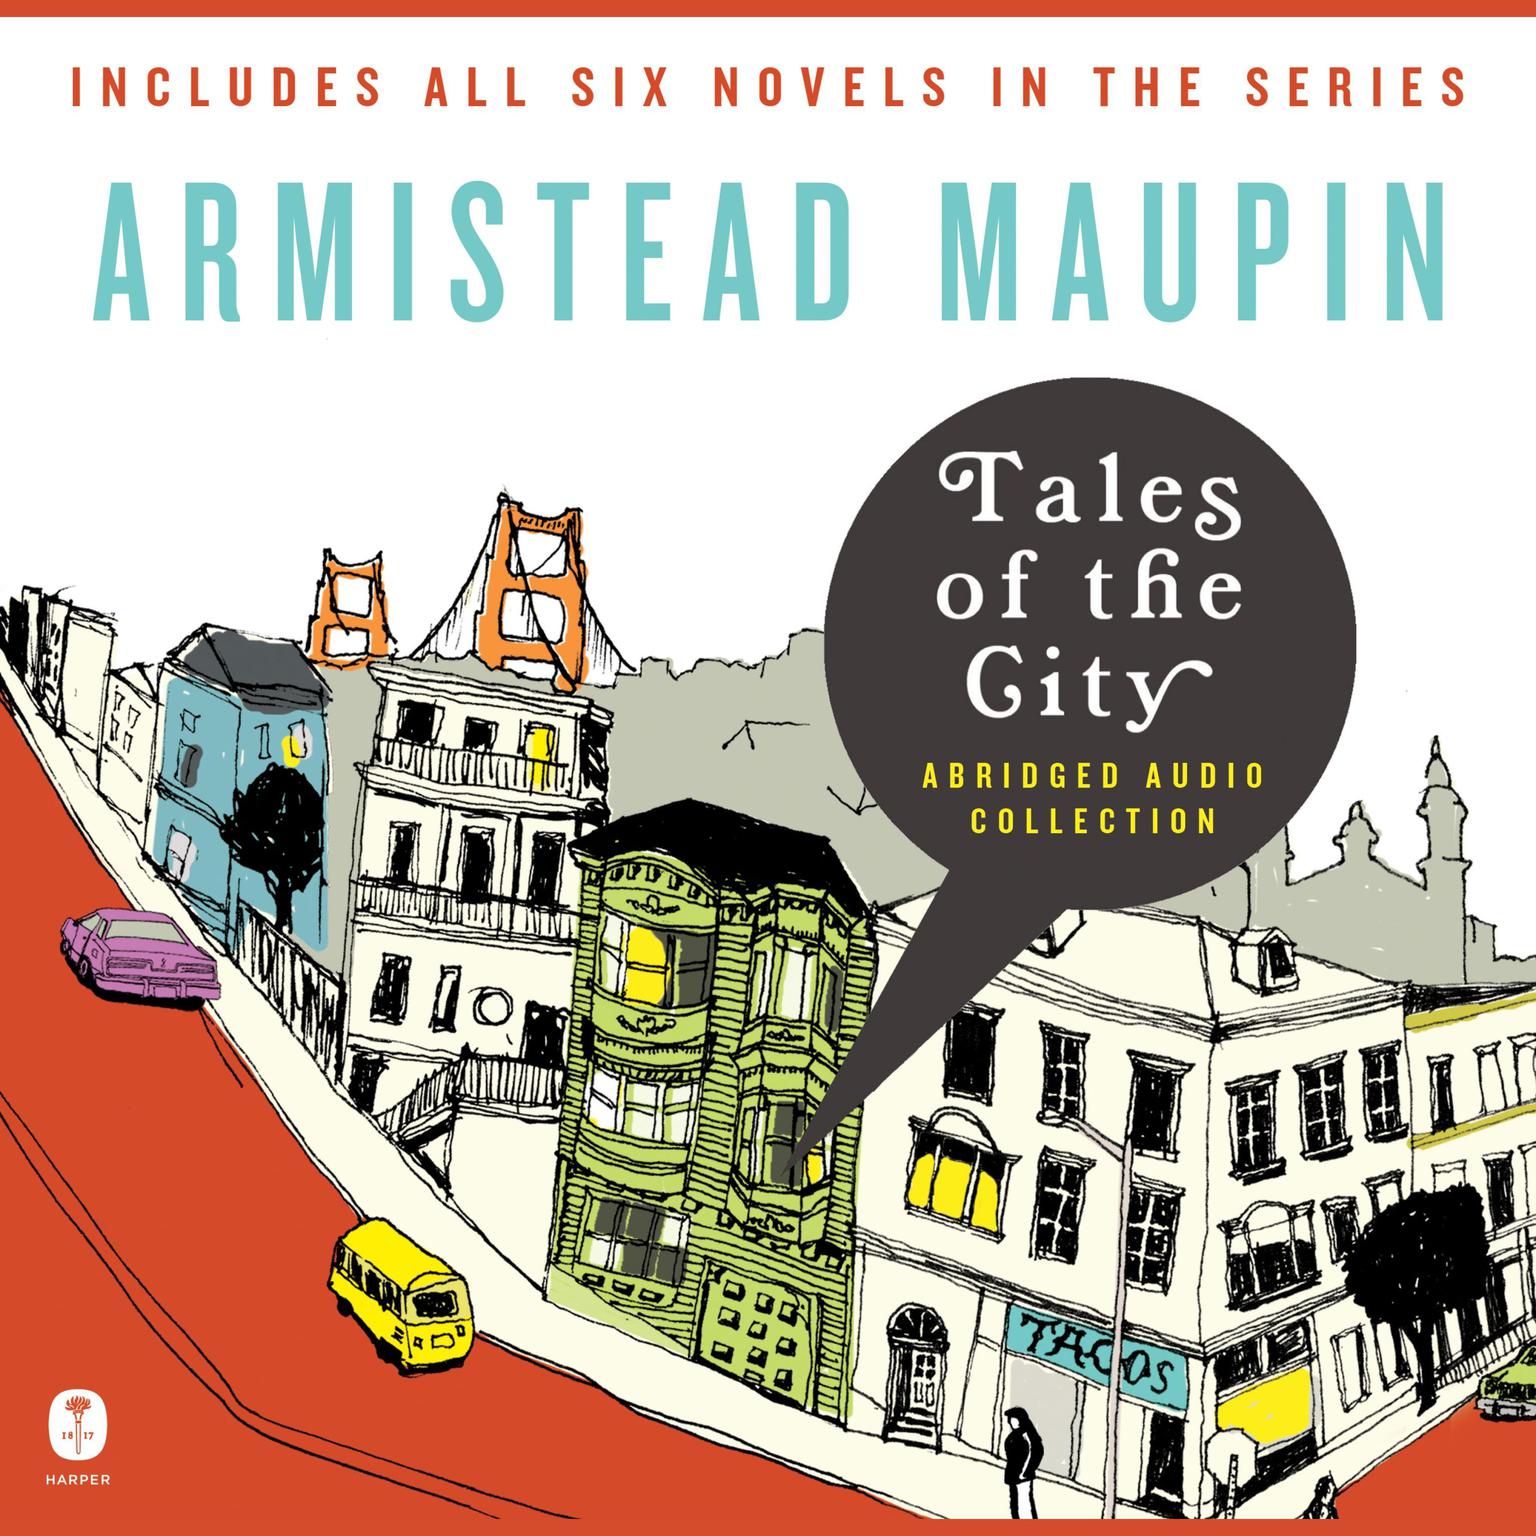 Tales of the City Audio Collection (Abridged): Tales of the City, Books 1-6 Audiobook, by Armistead Maupin